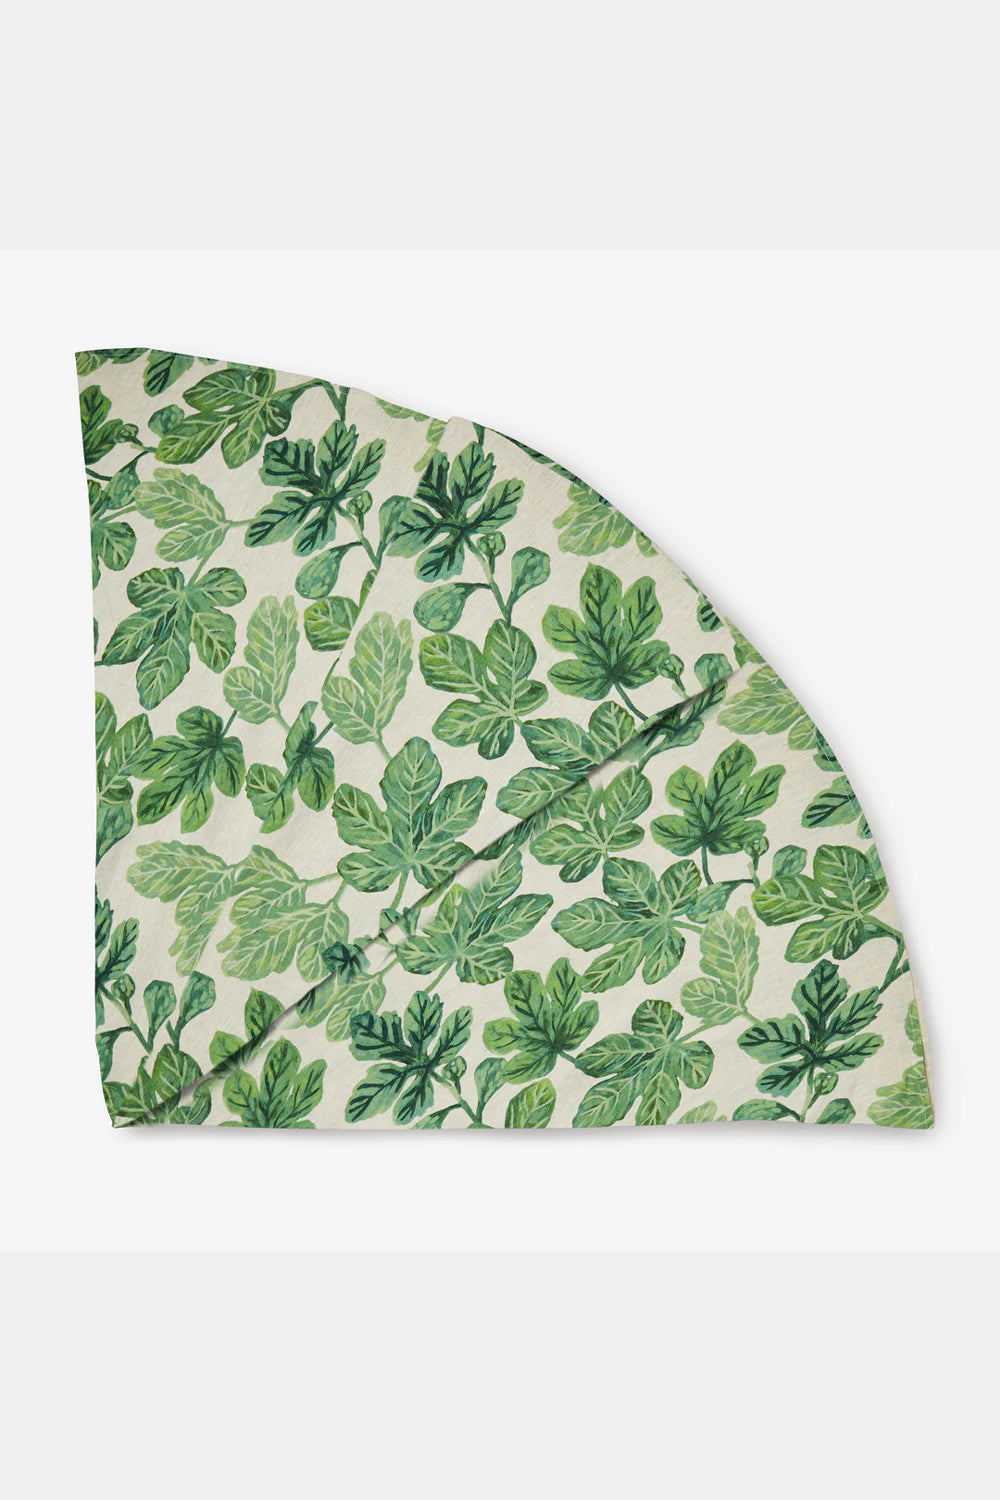 BONNIE AND NEIL FIG GREEN TABLECLOTH ROUND